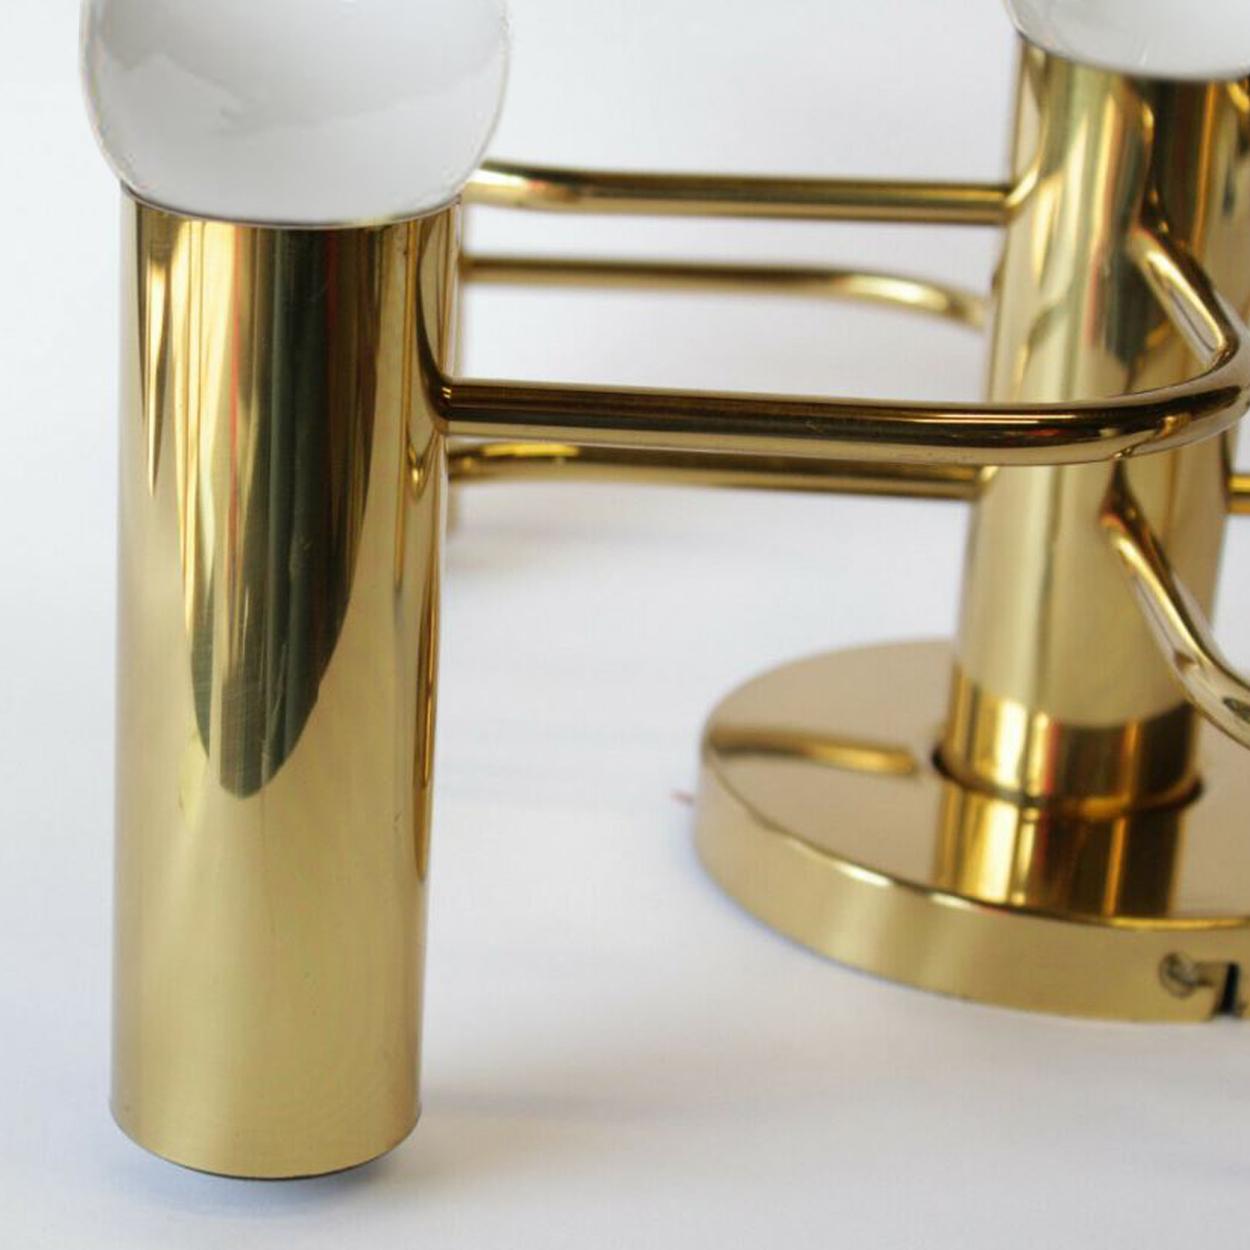 1 of the 4 Leola Sculptural Brass 5-Light Ceiling or Wall Flushmount, 1970s 1